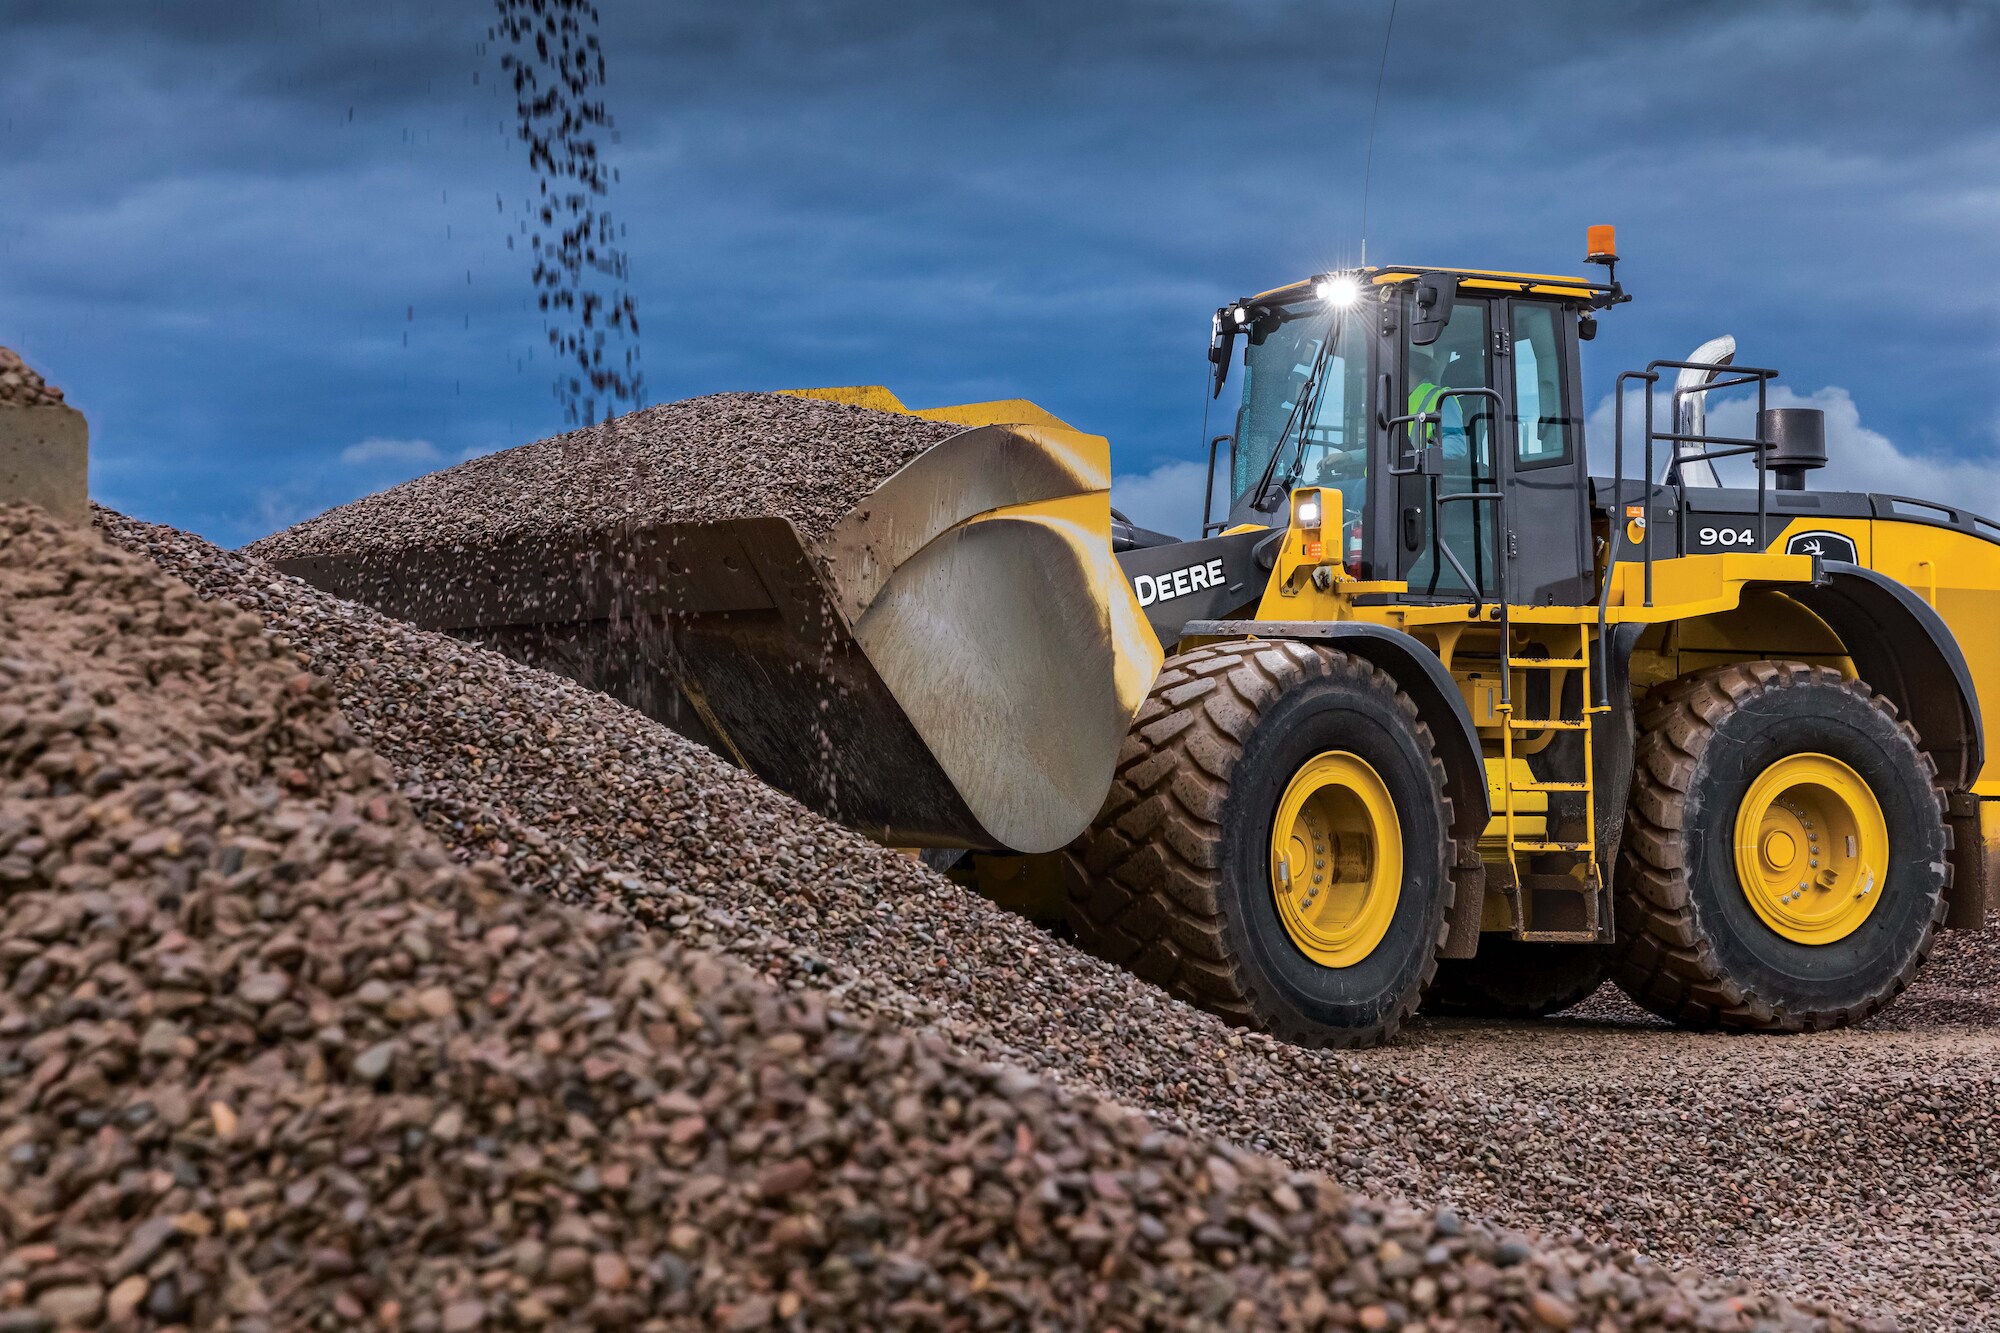 John Deere 904 P-tier Wheel Loader scooping gravel out of a pile on the job